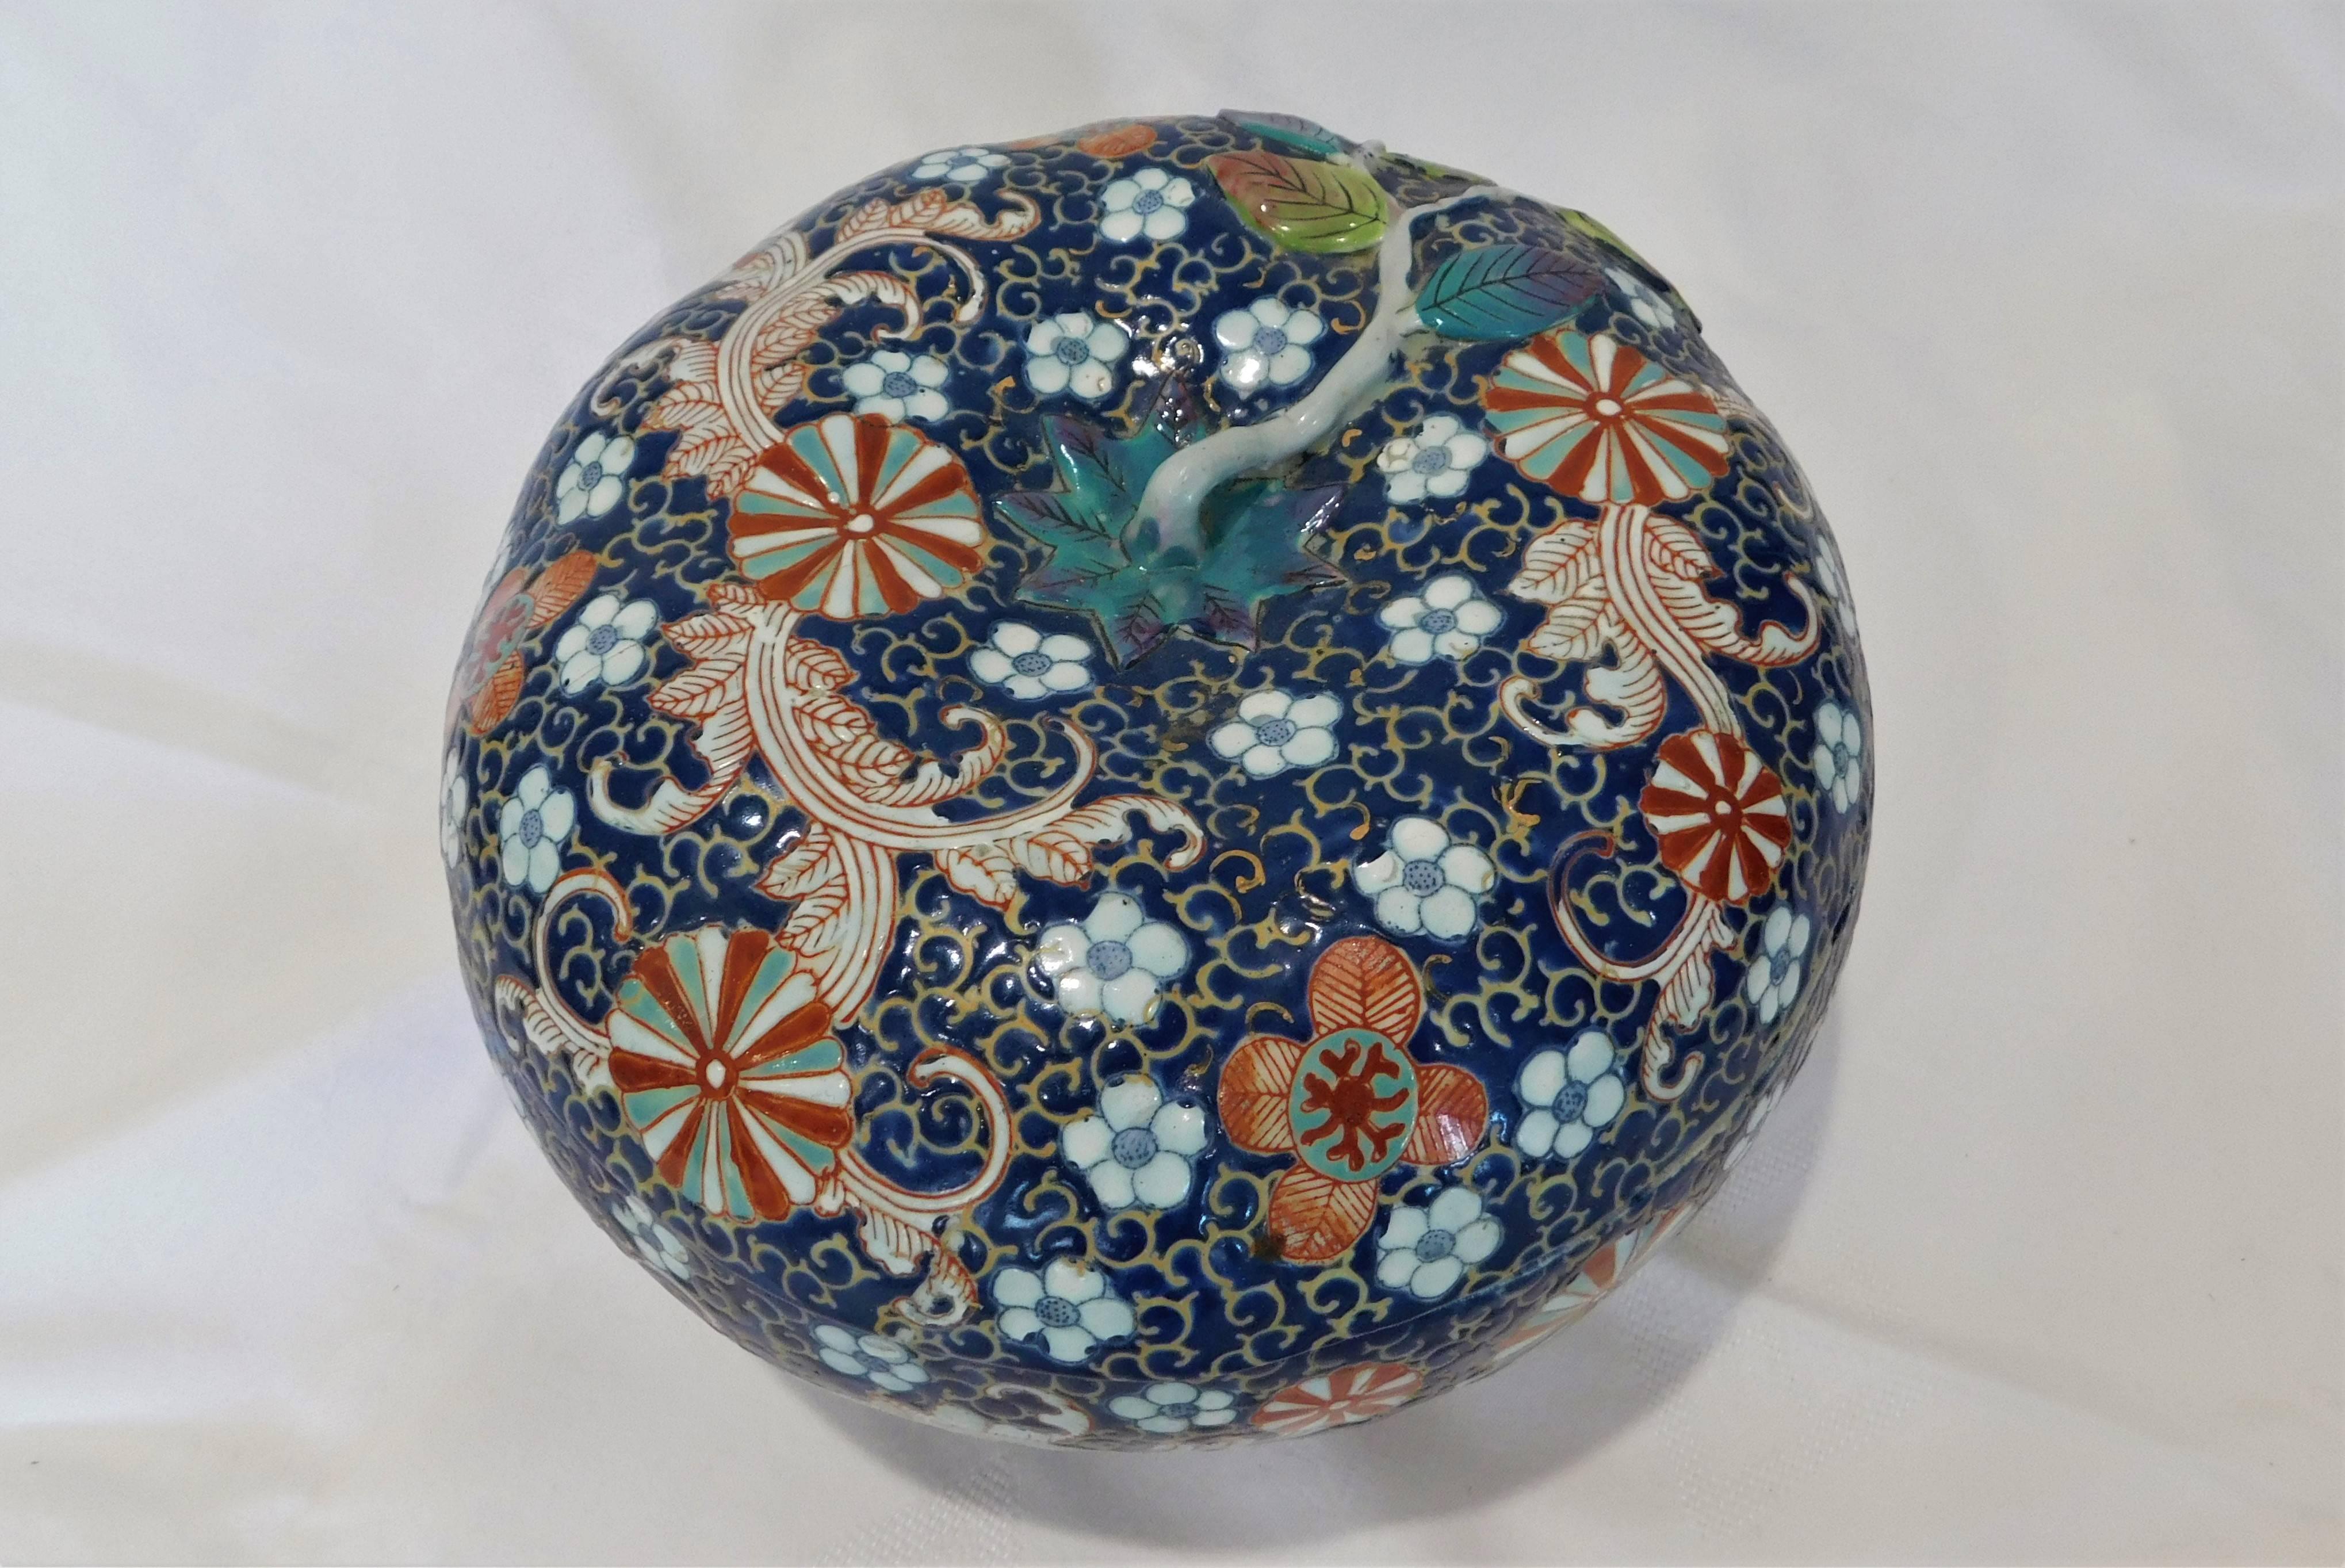 Japanese porcelain floral bowl is in the shape of a gourd with lid.